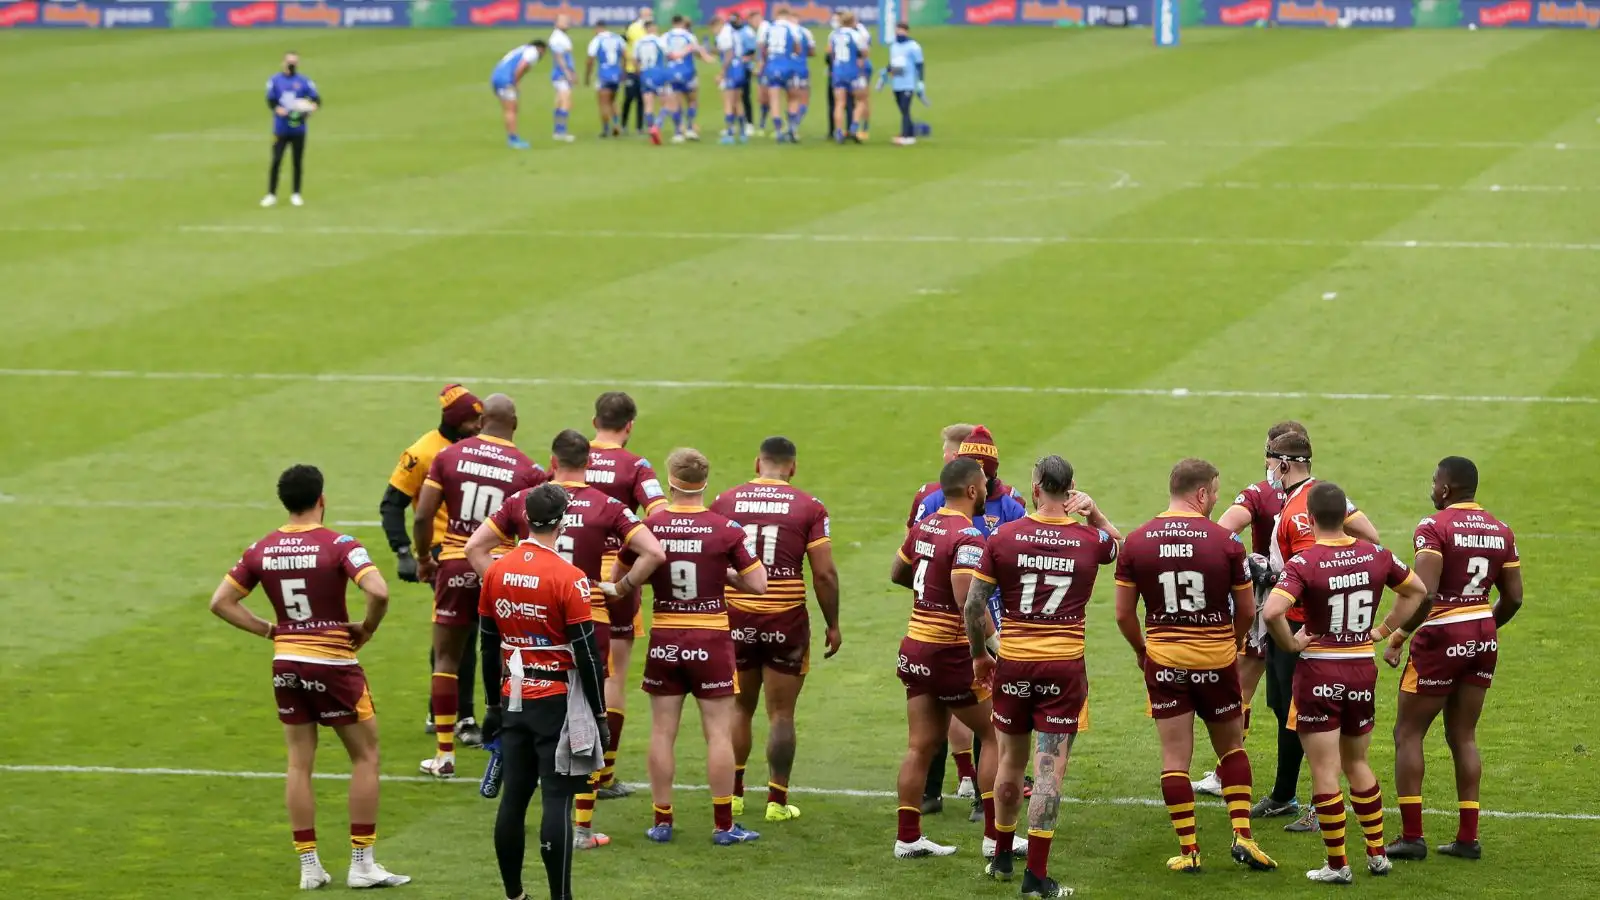 Huddersfield Giants tie down young cross-code starlet with first professional deal: ‘This was always a major goal’